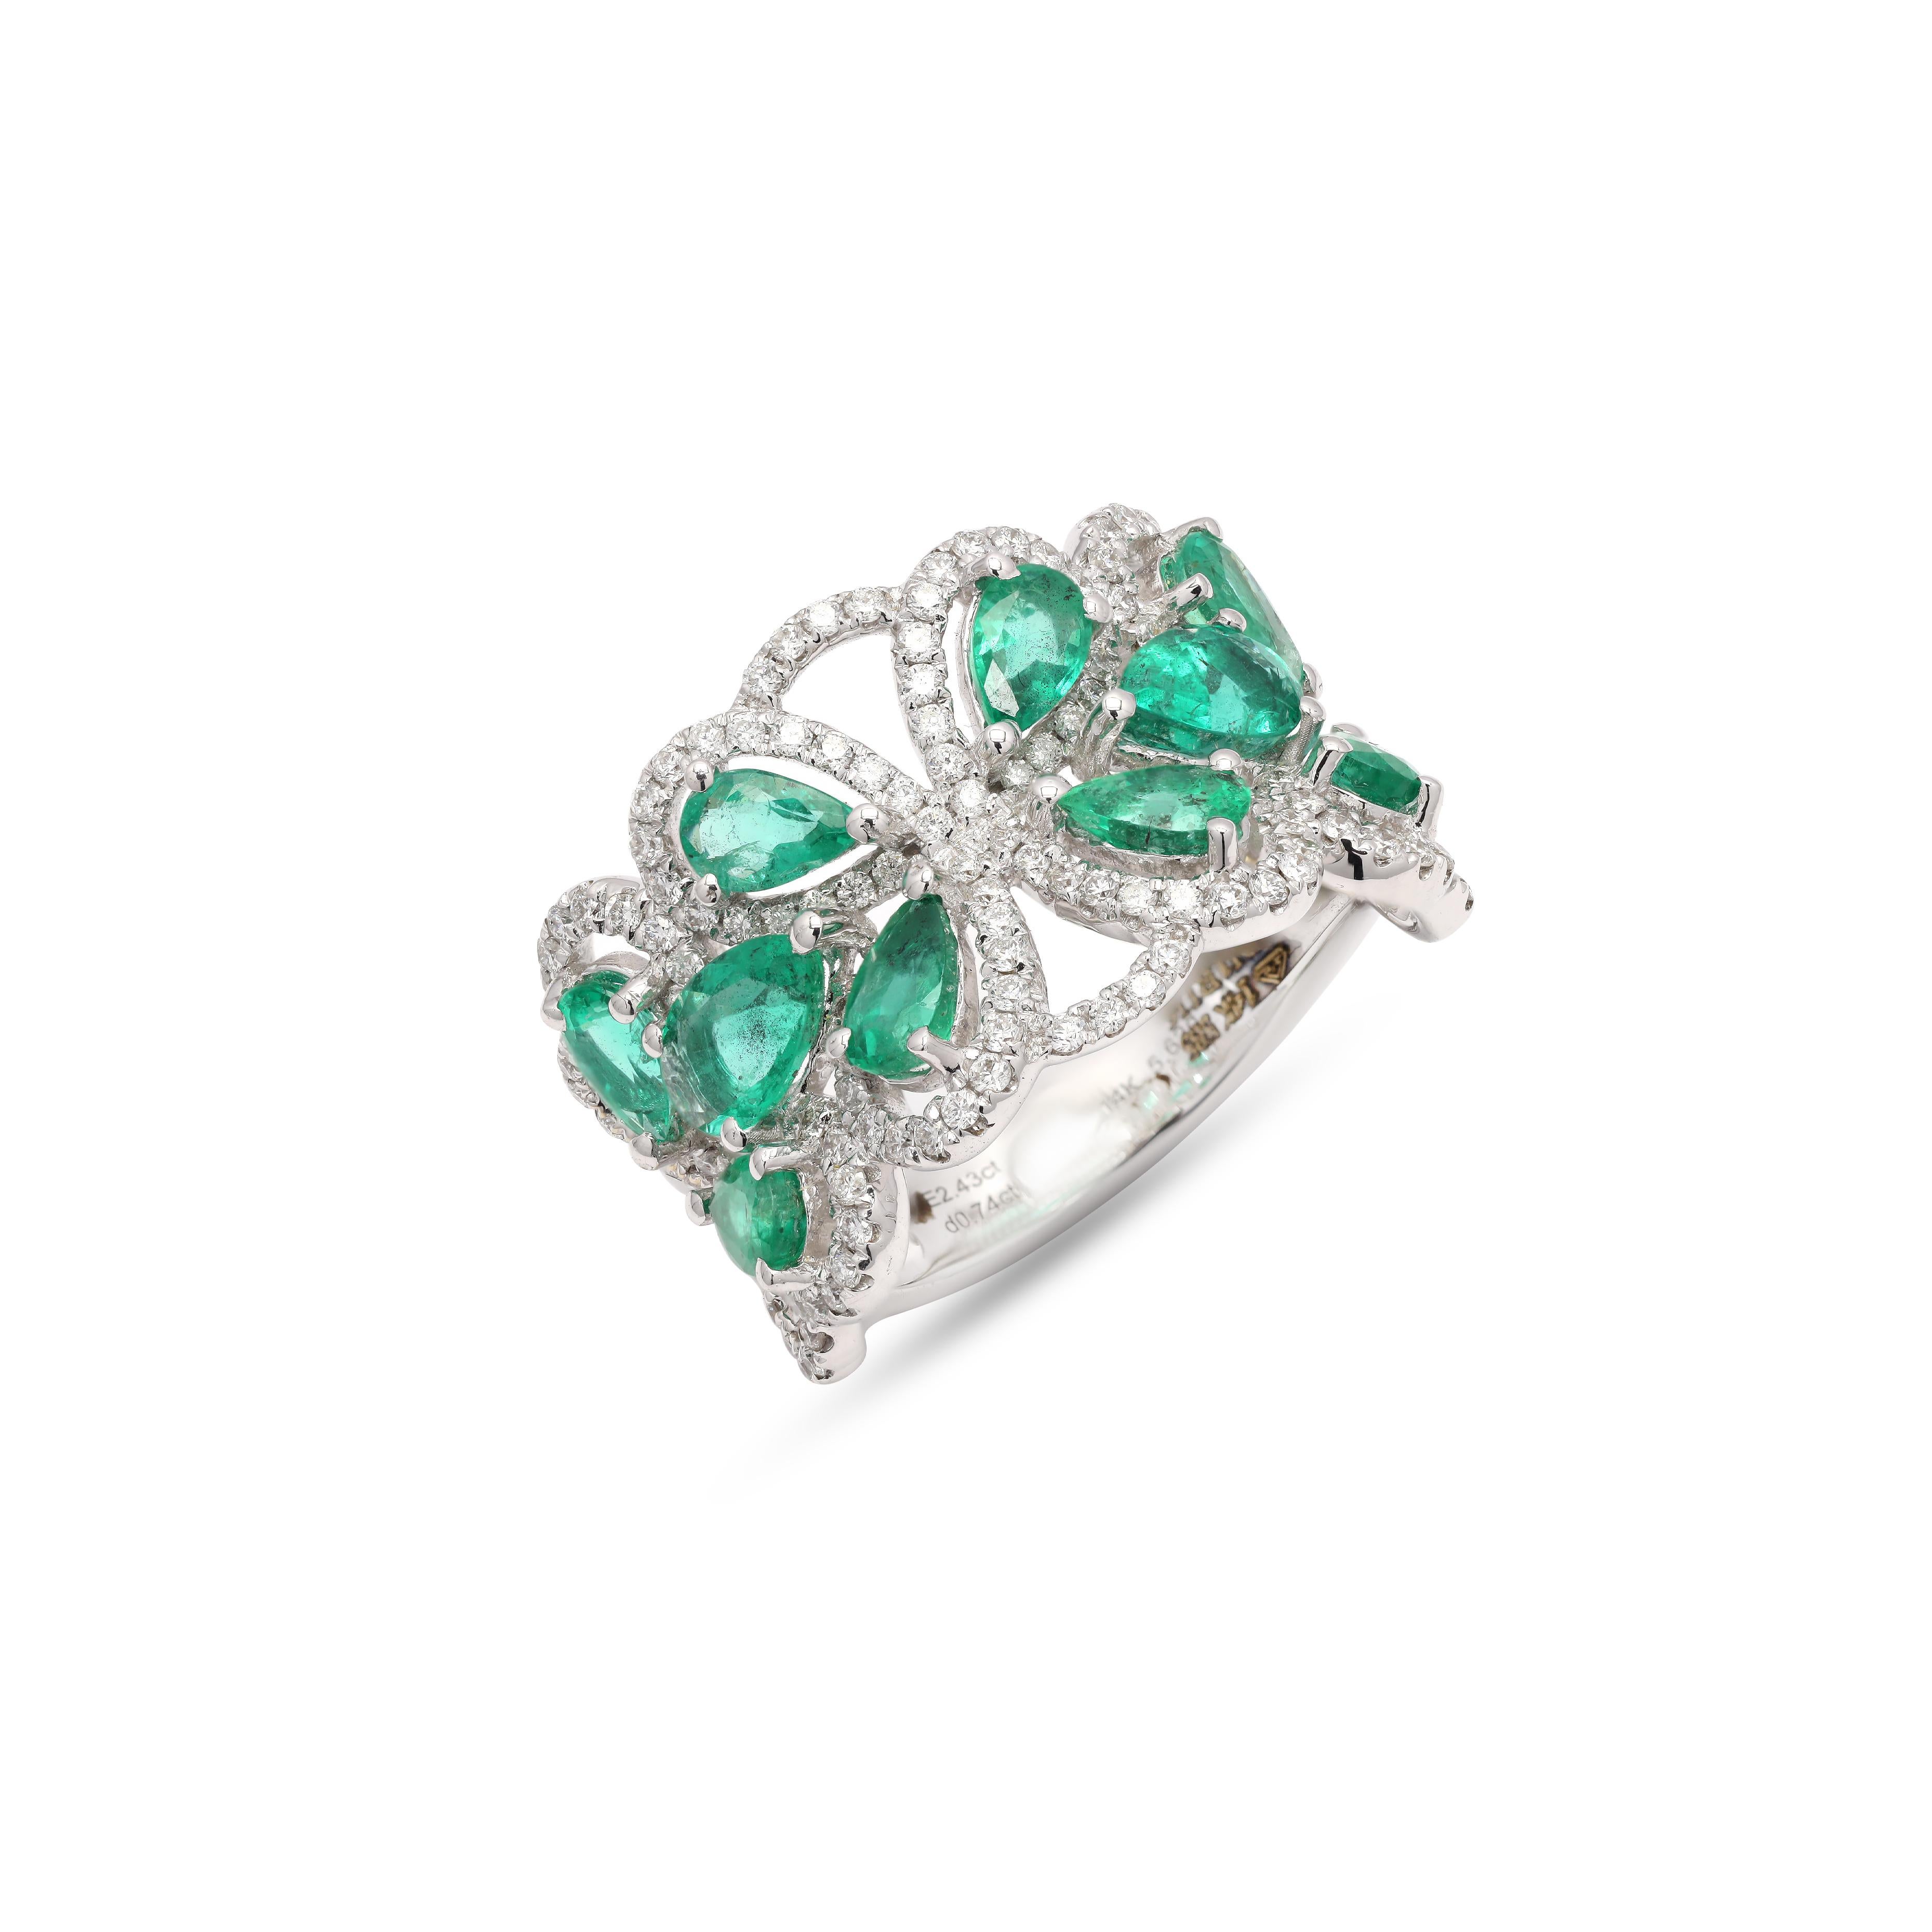 For Sale:  Bridal 14k White Gold Diamond and Emerald Ring 4